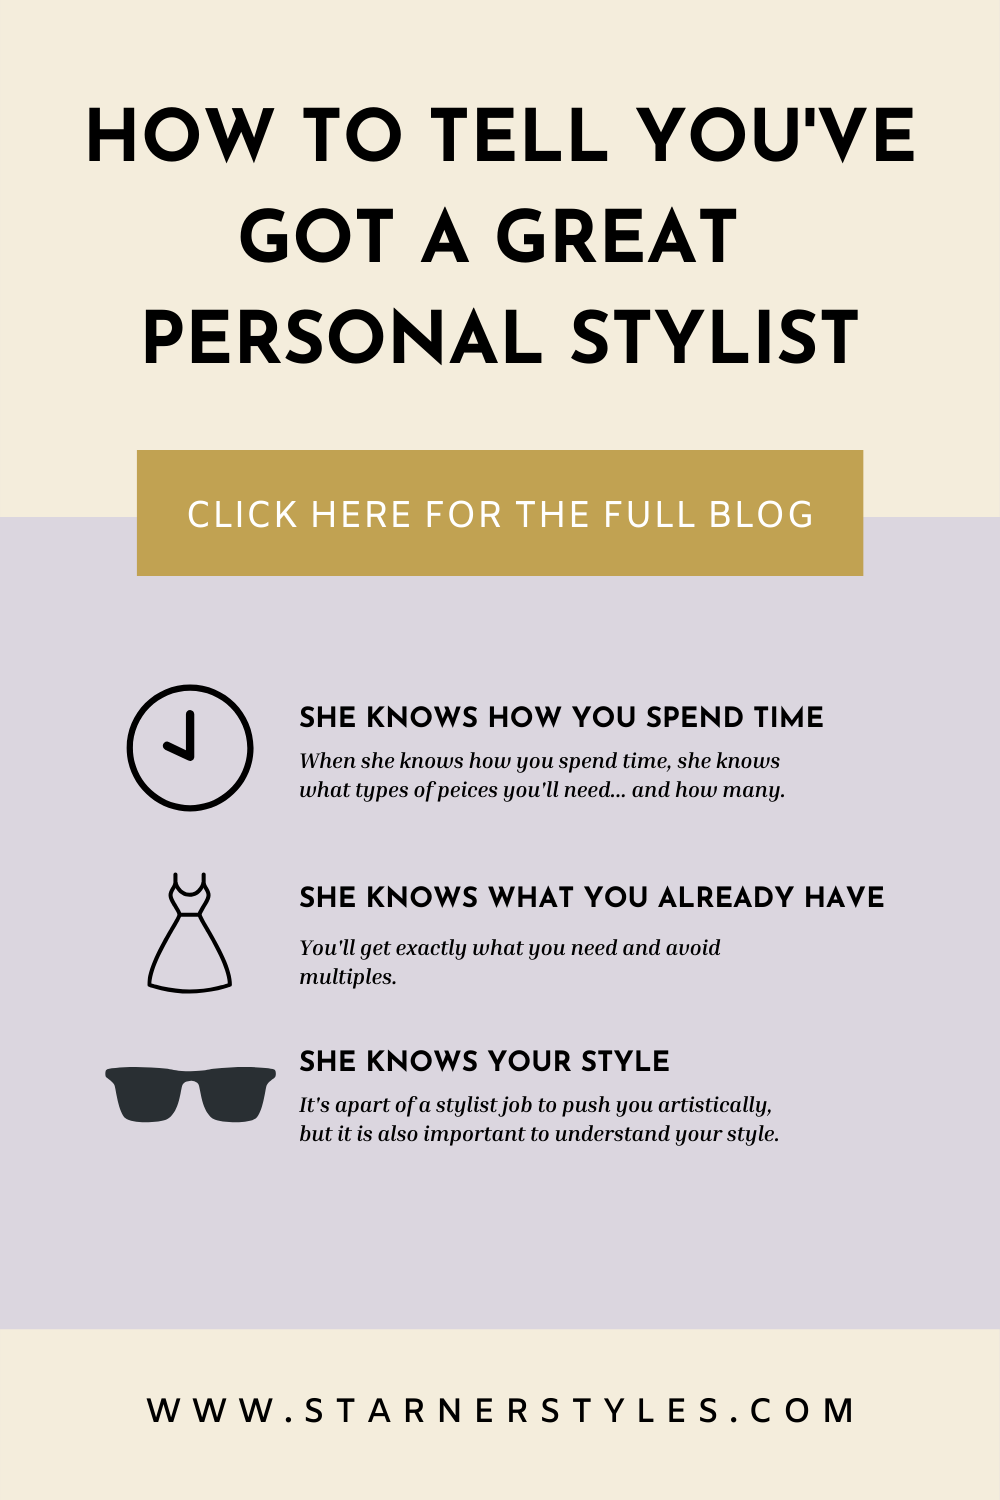 How to Know Your Personal Stylist is Good